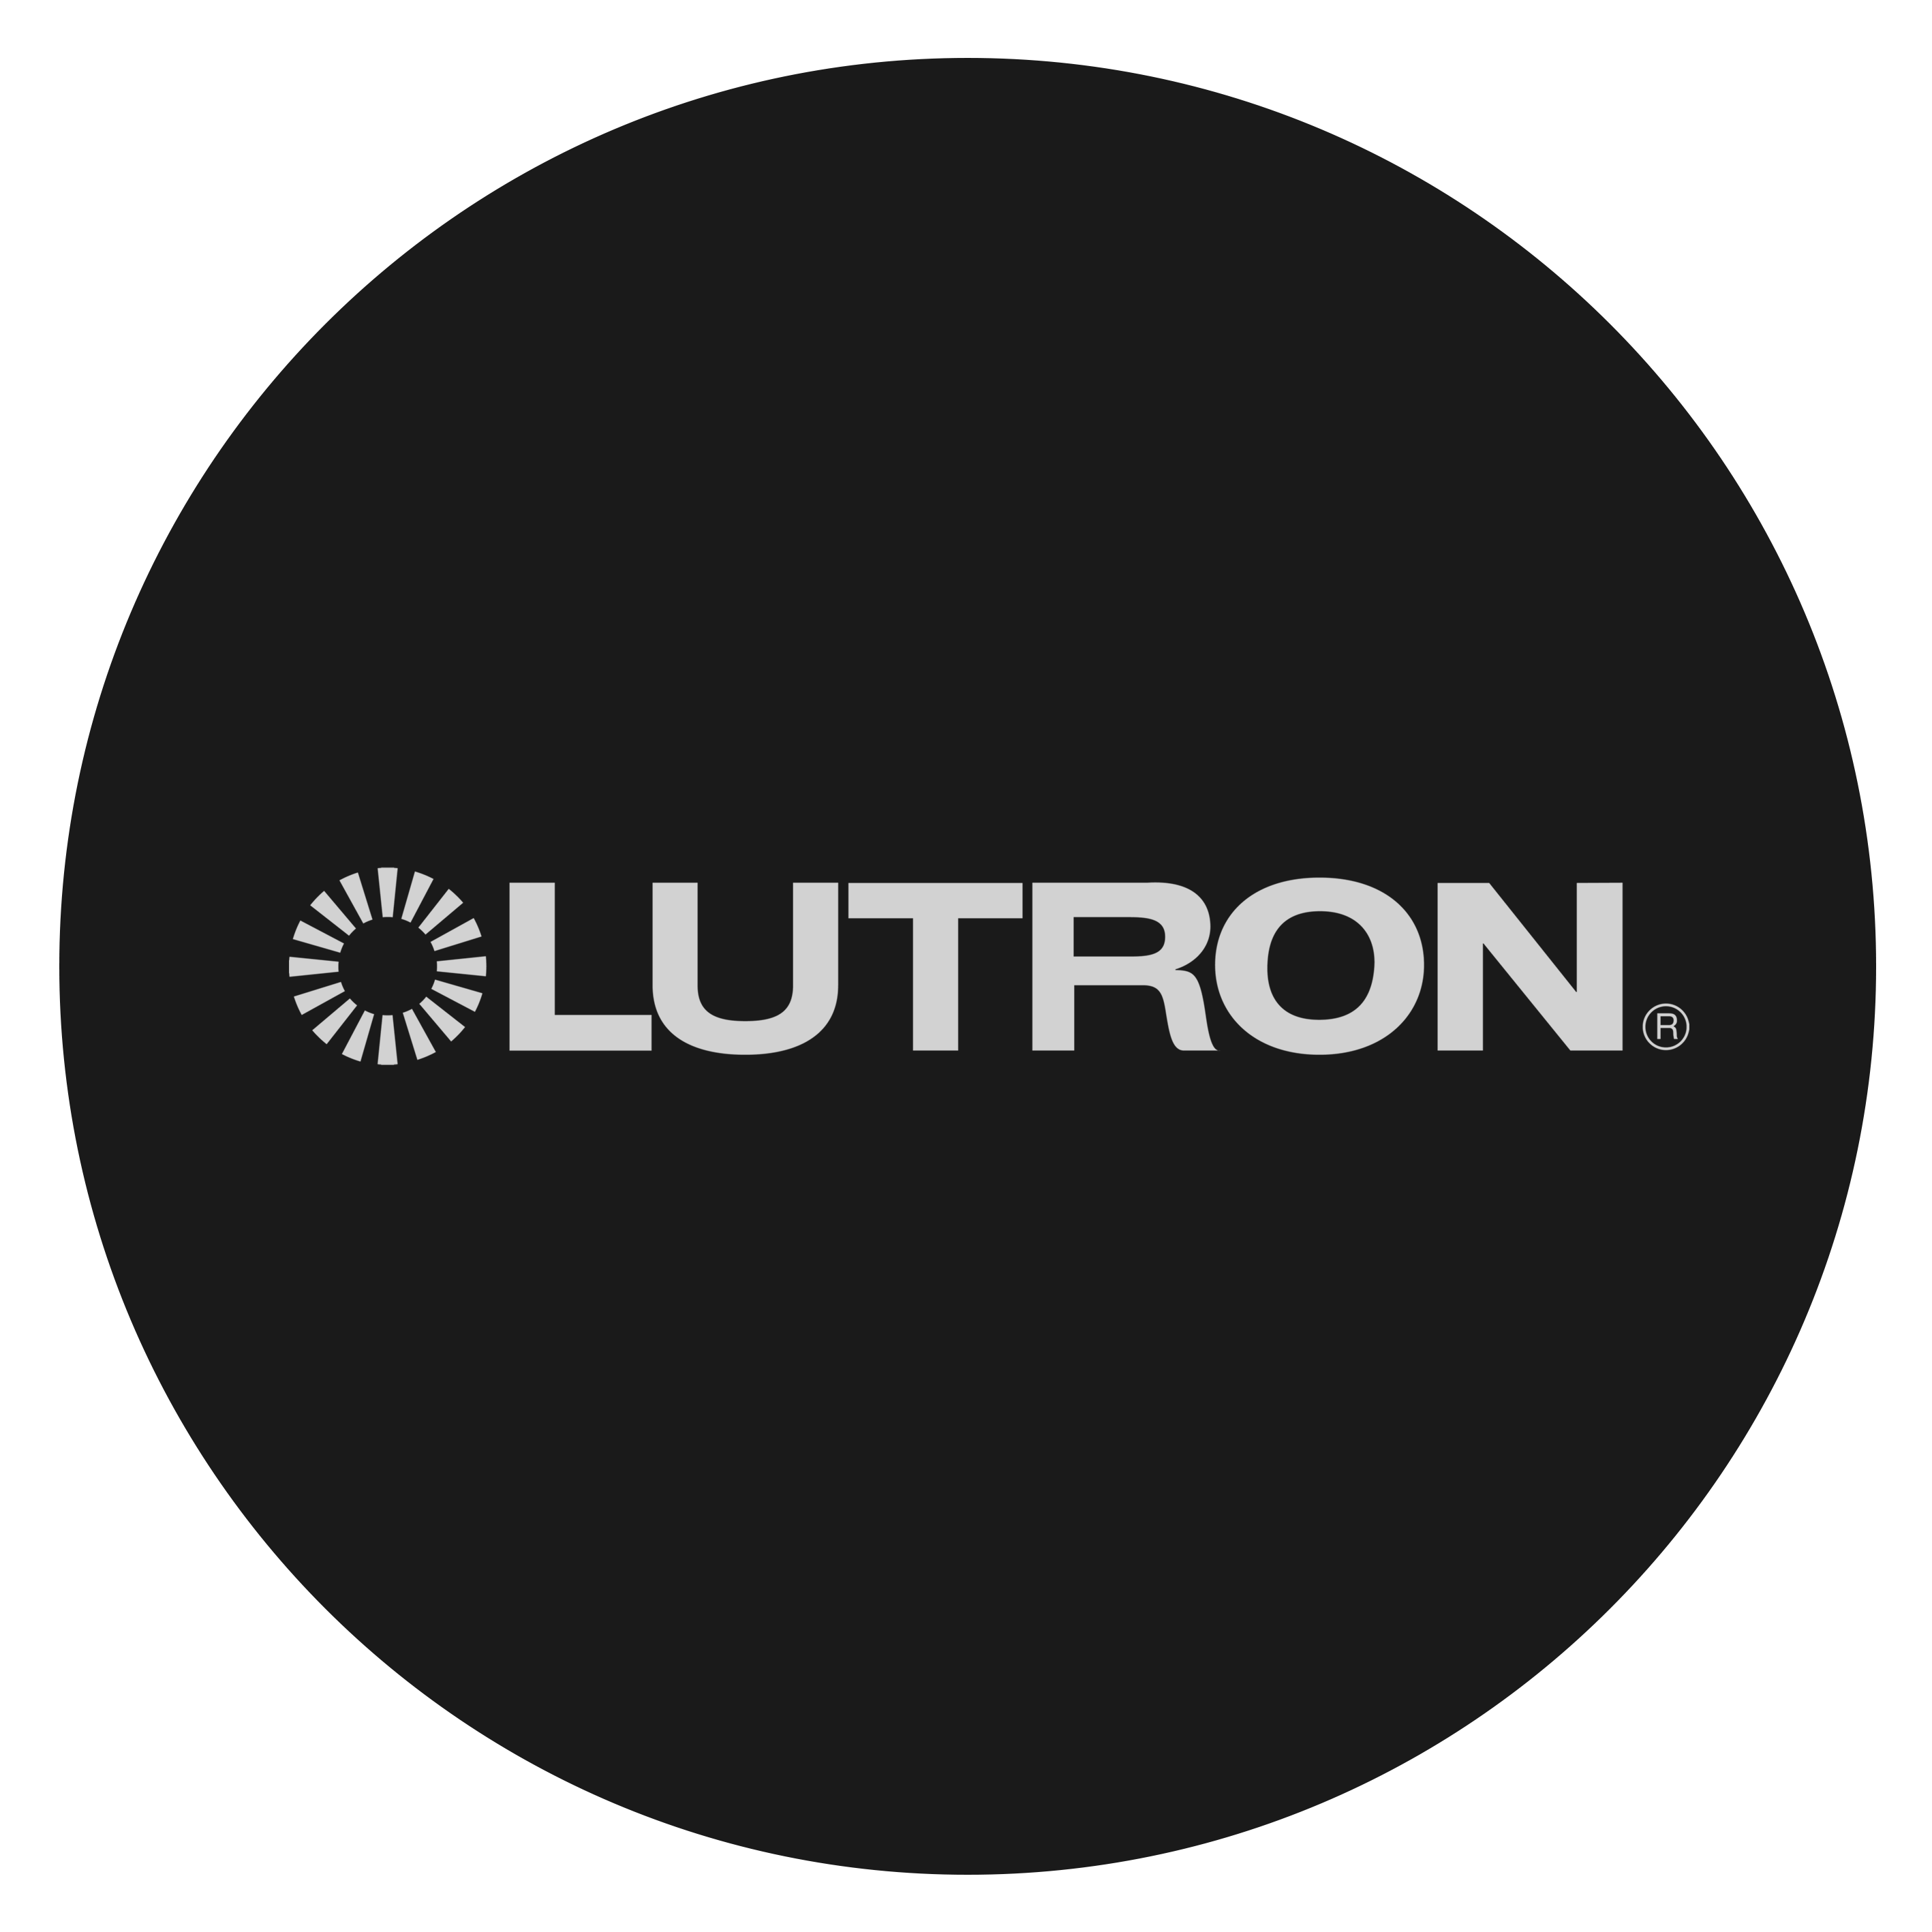 Lutron in uOS